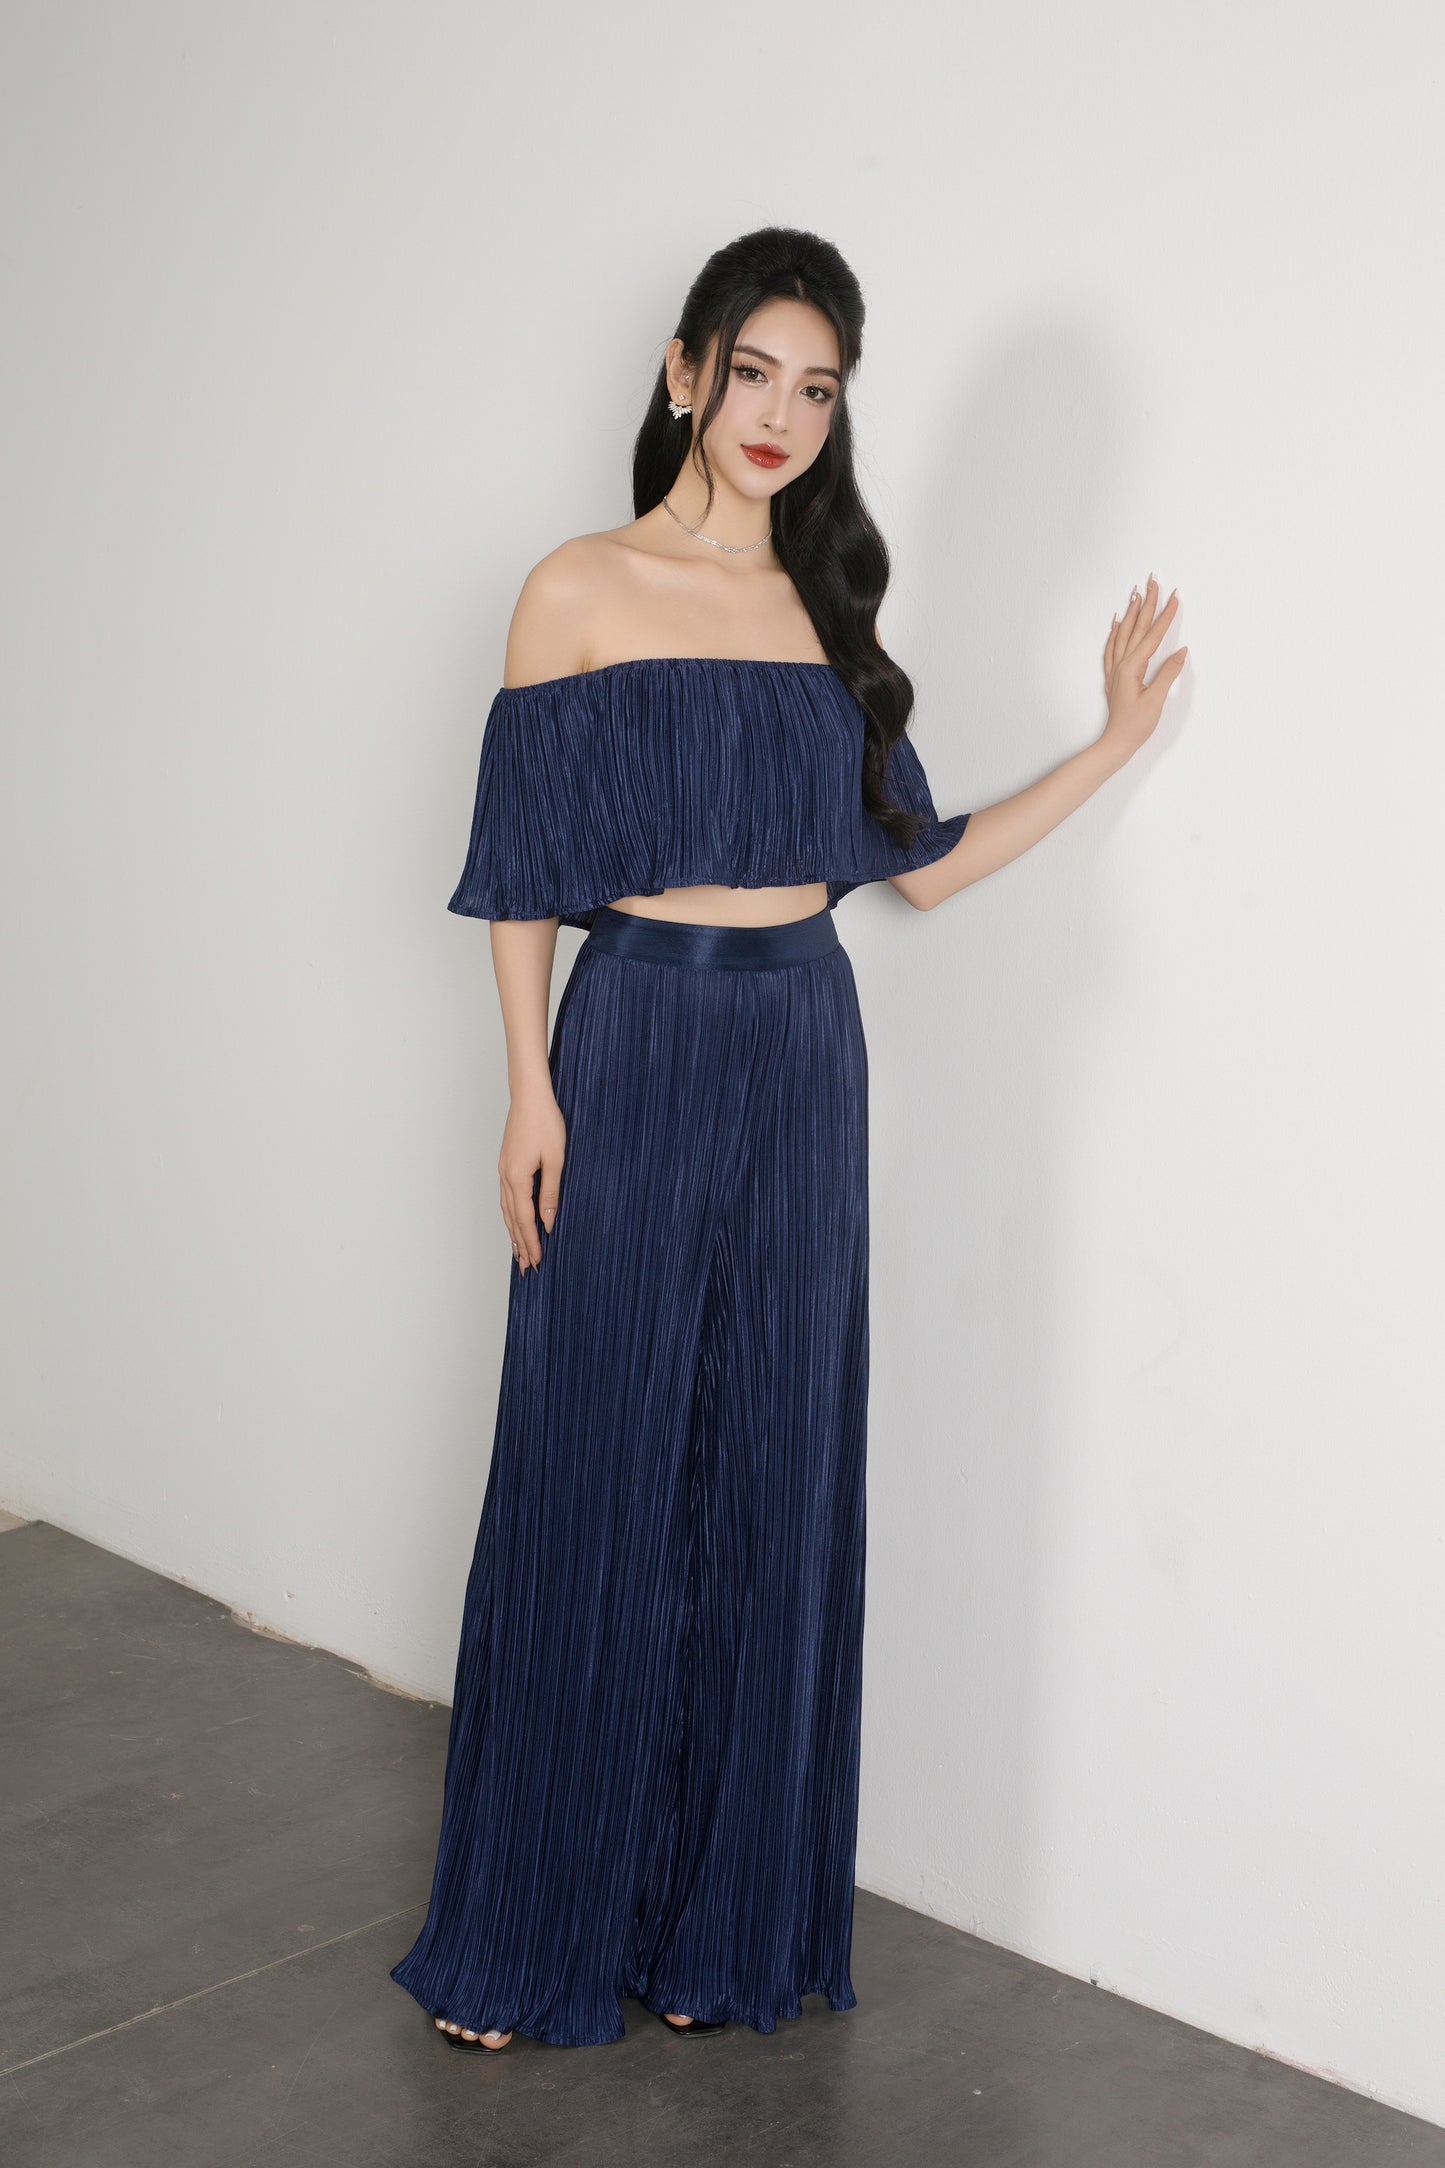 Cleolia 2 Ways Pleated Top in Navy Blue